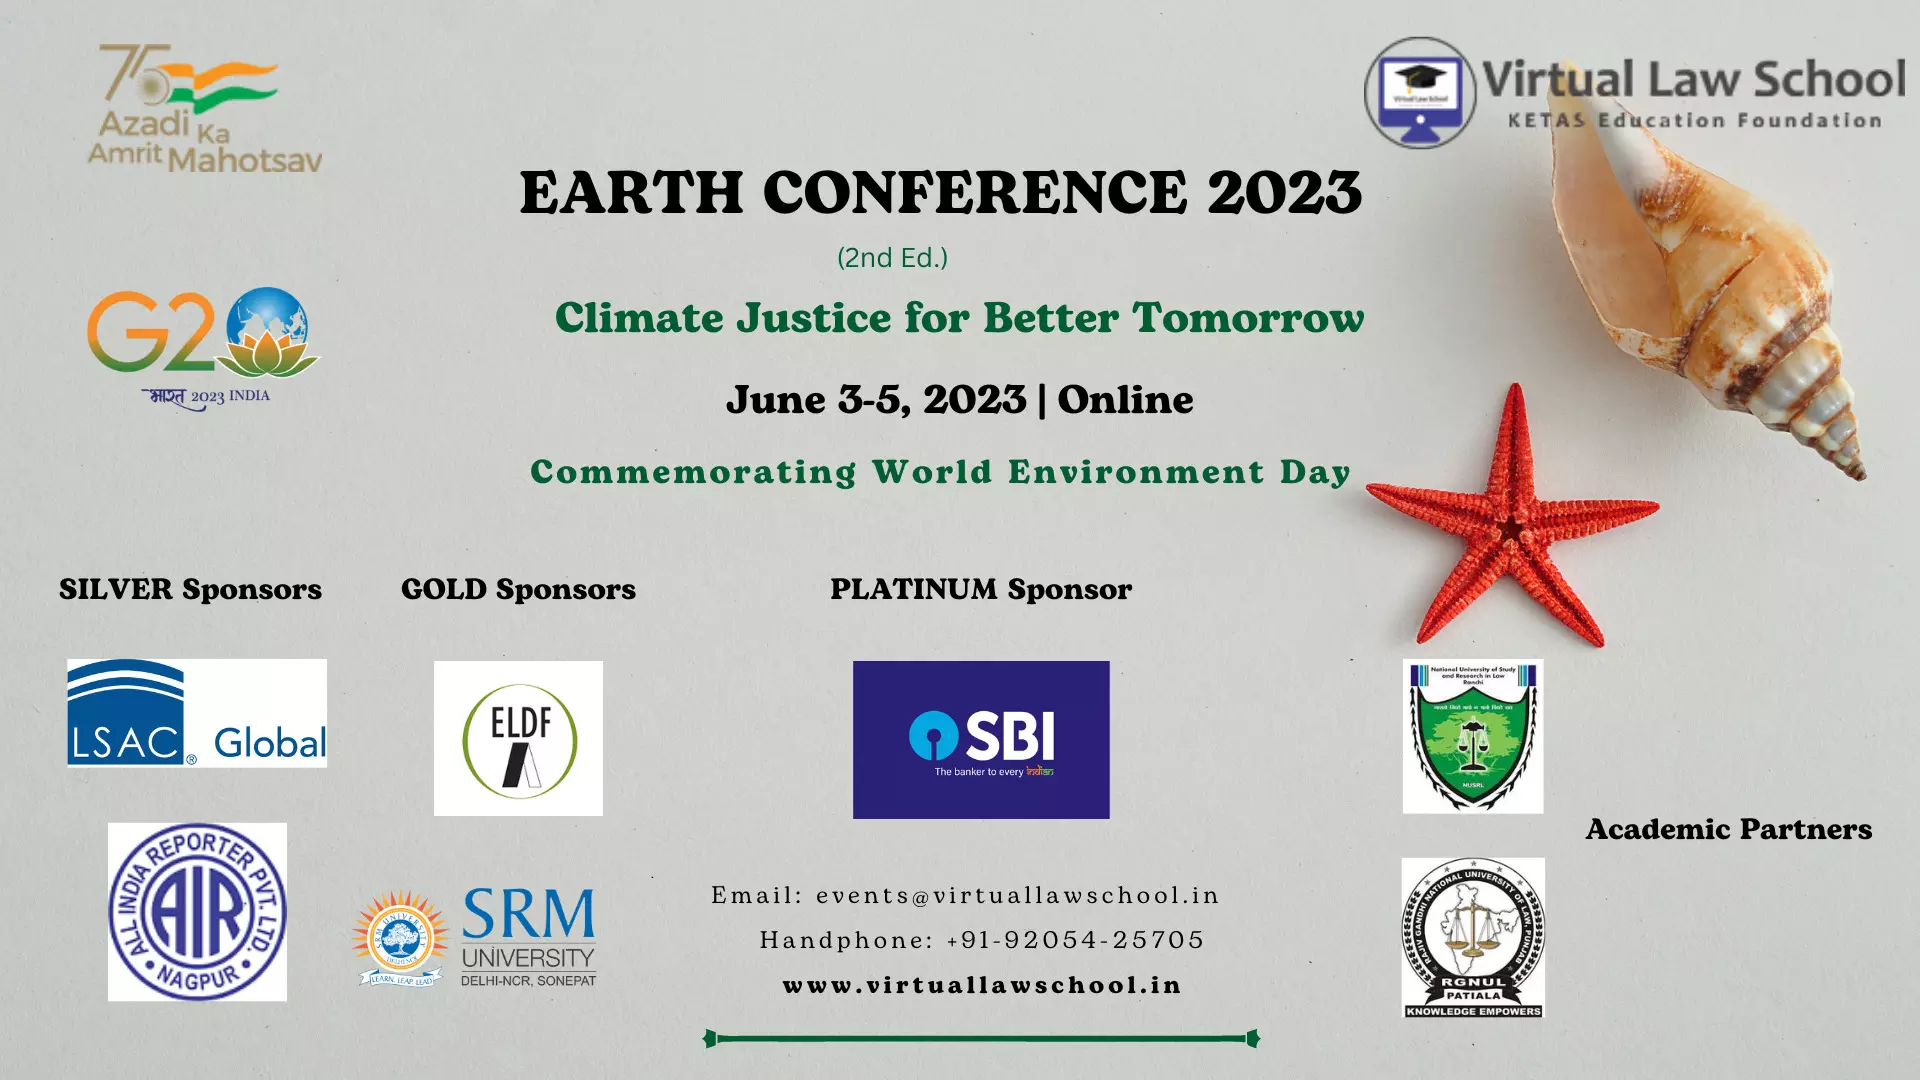 Call for Submission | 2nd Earth Conference on Climate Justice for Better Tomorrow 2023 | Virtual Law School, KETAS Education Foundation | Submit by May 27